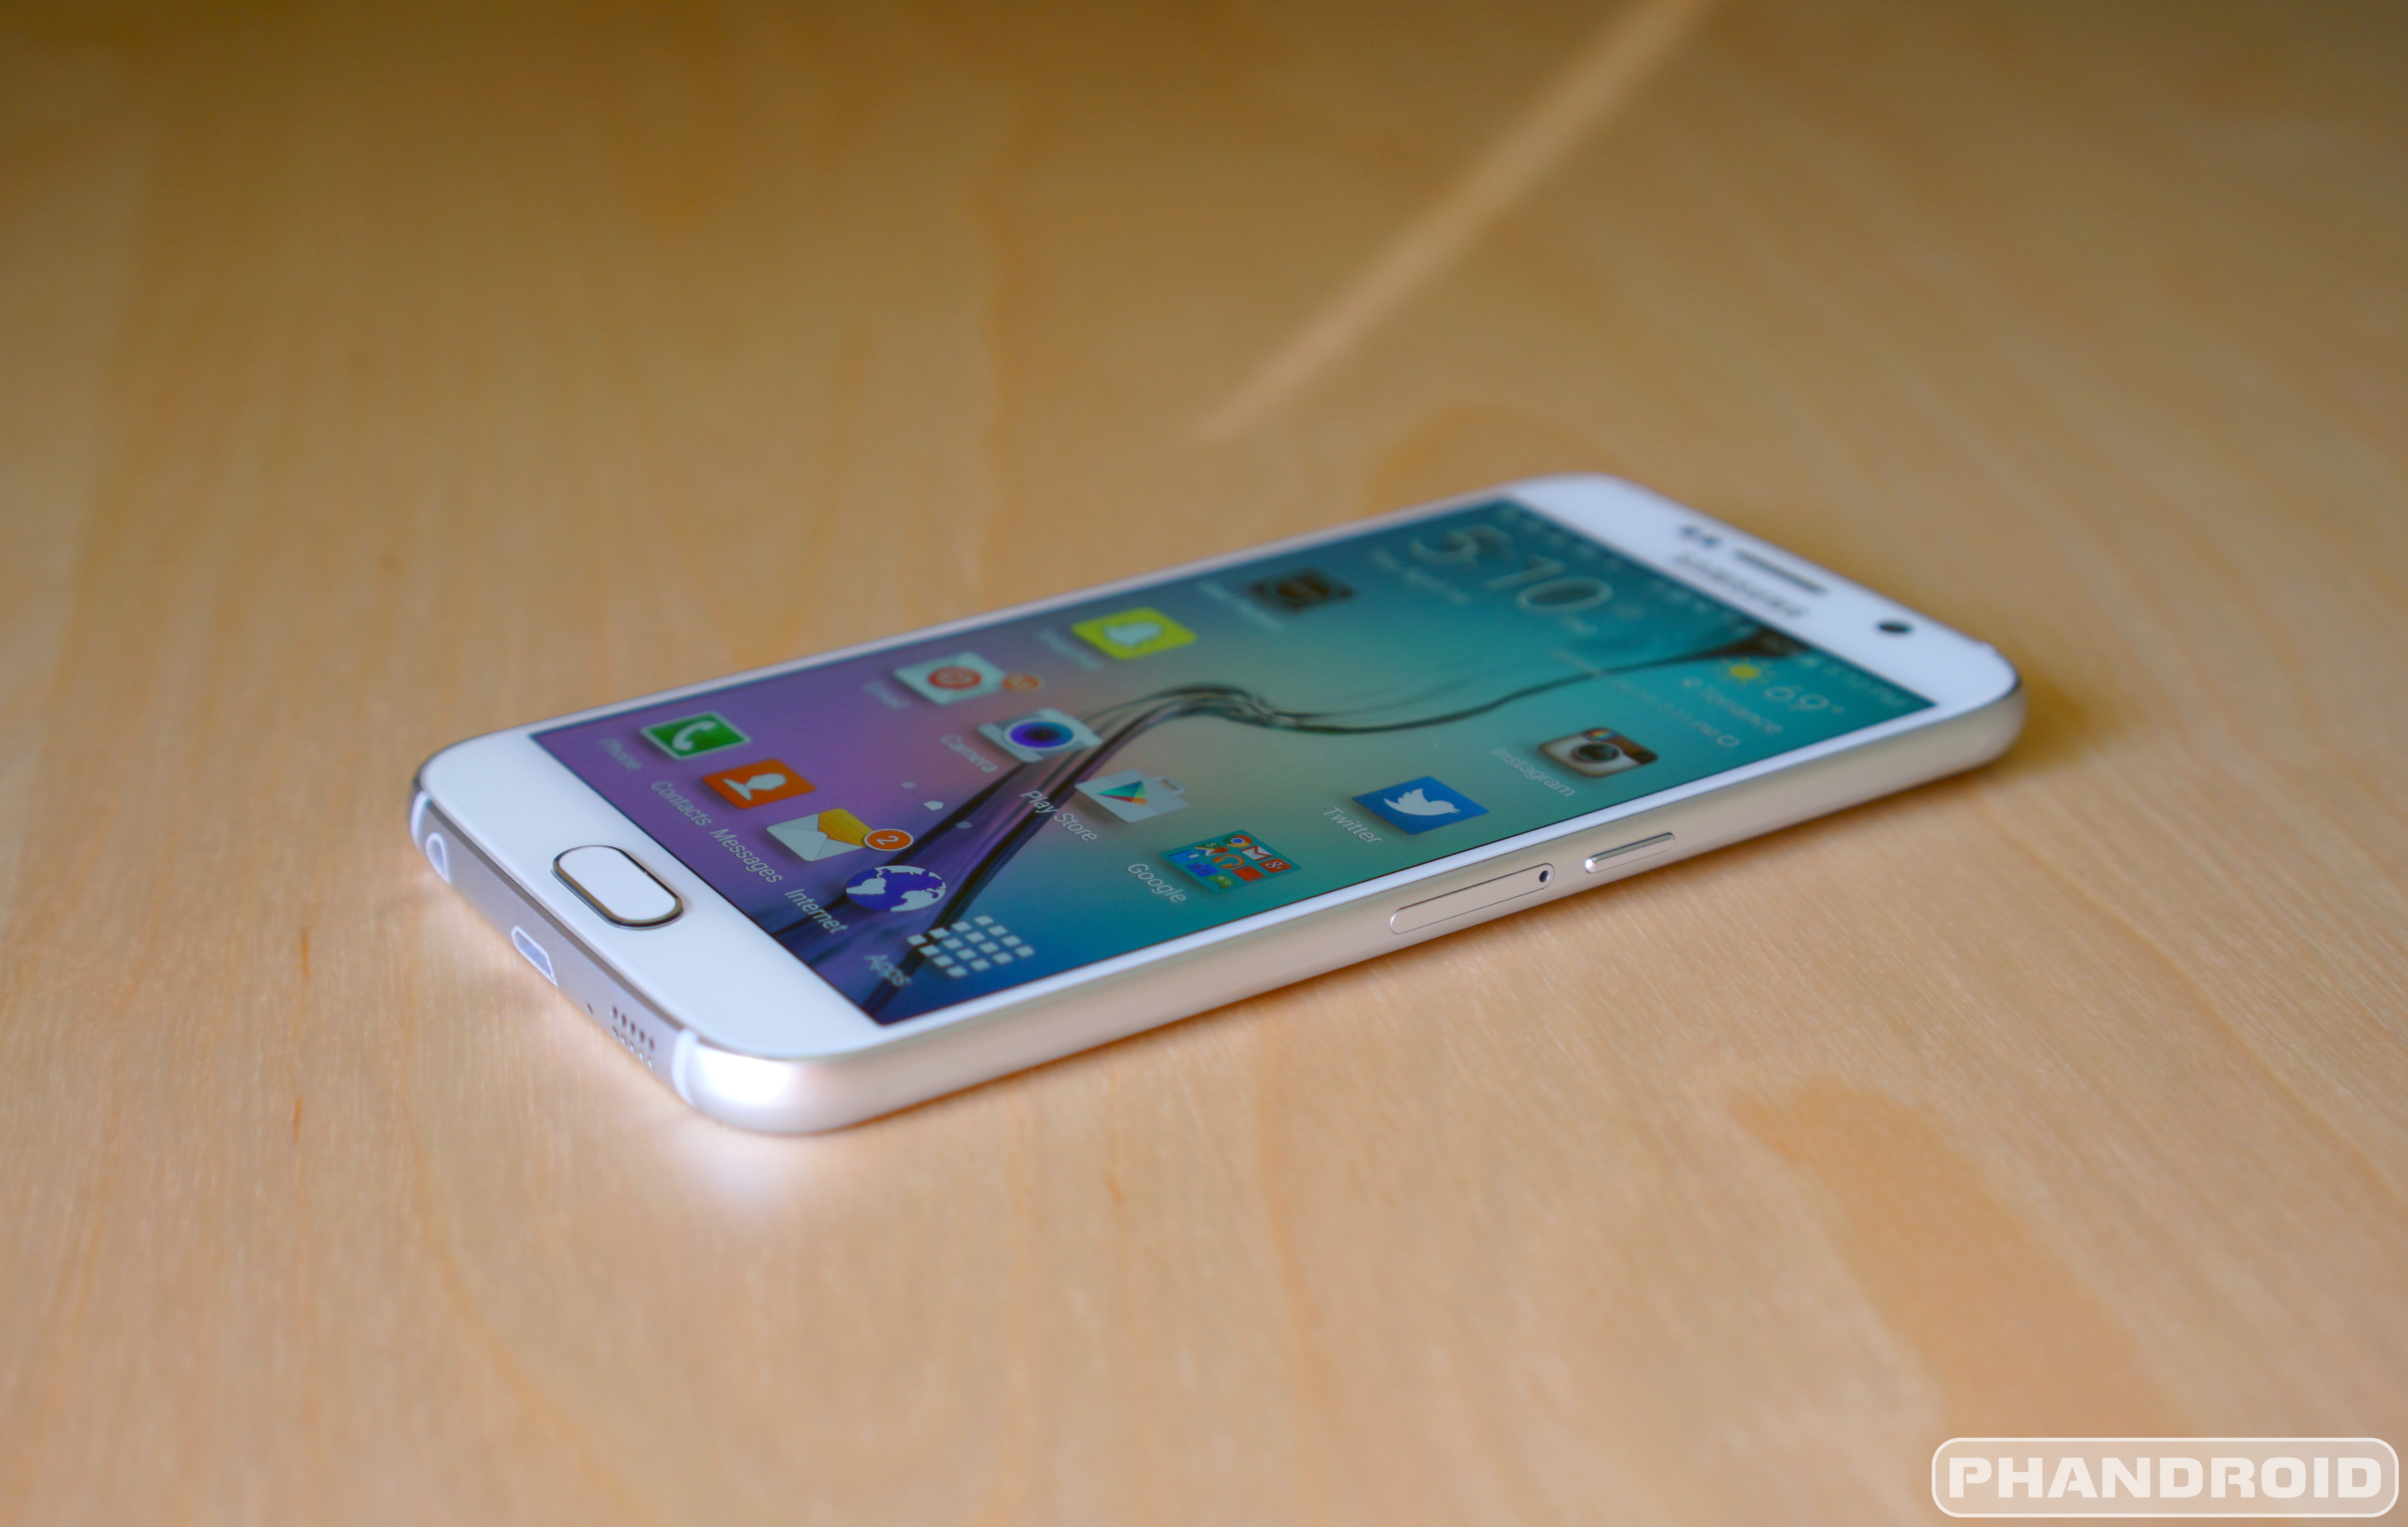 Bot Een goede vriend Komkommer Samsung Galaxy S6 Review – Phandroid